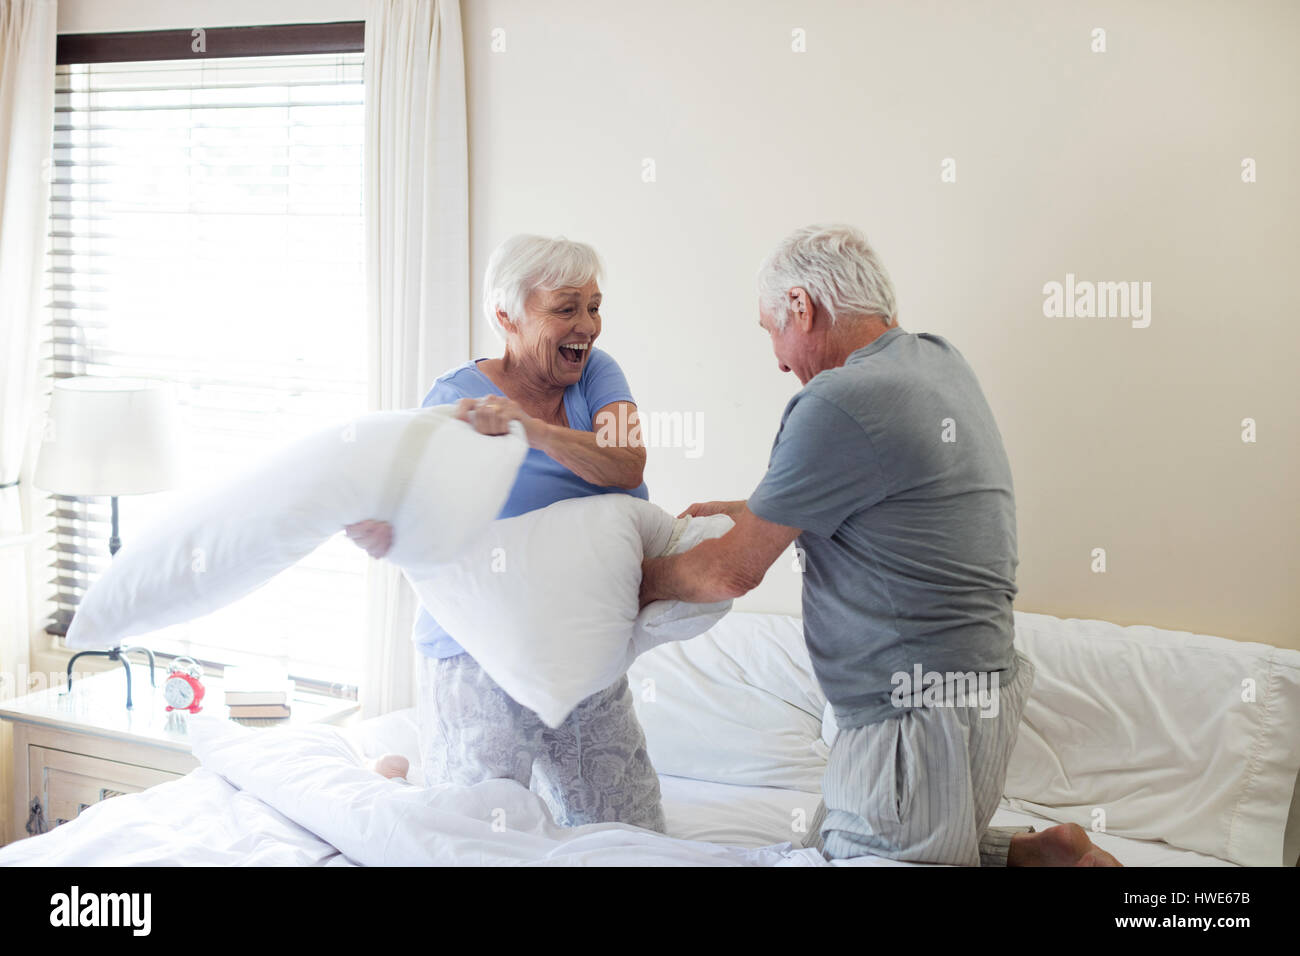 Senior couple having pillow fight on bed in bedroom Stock Photo